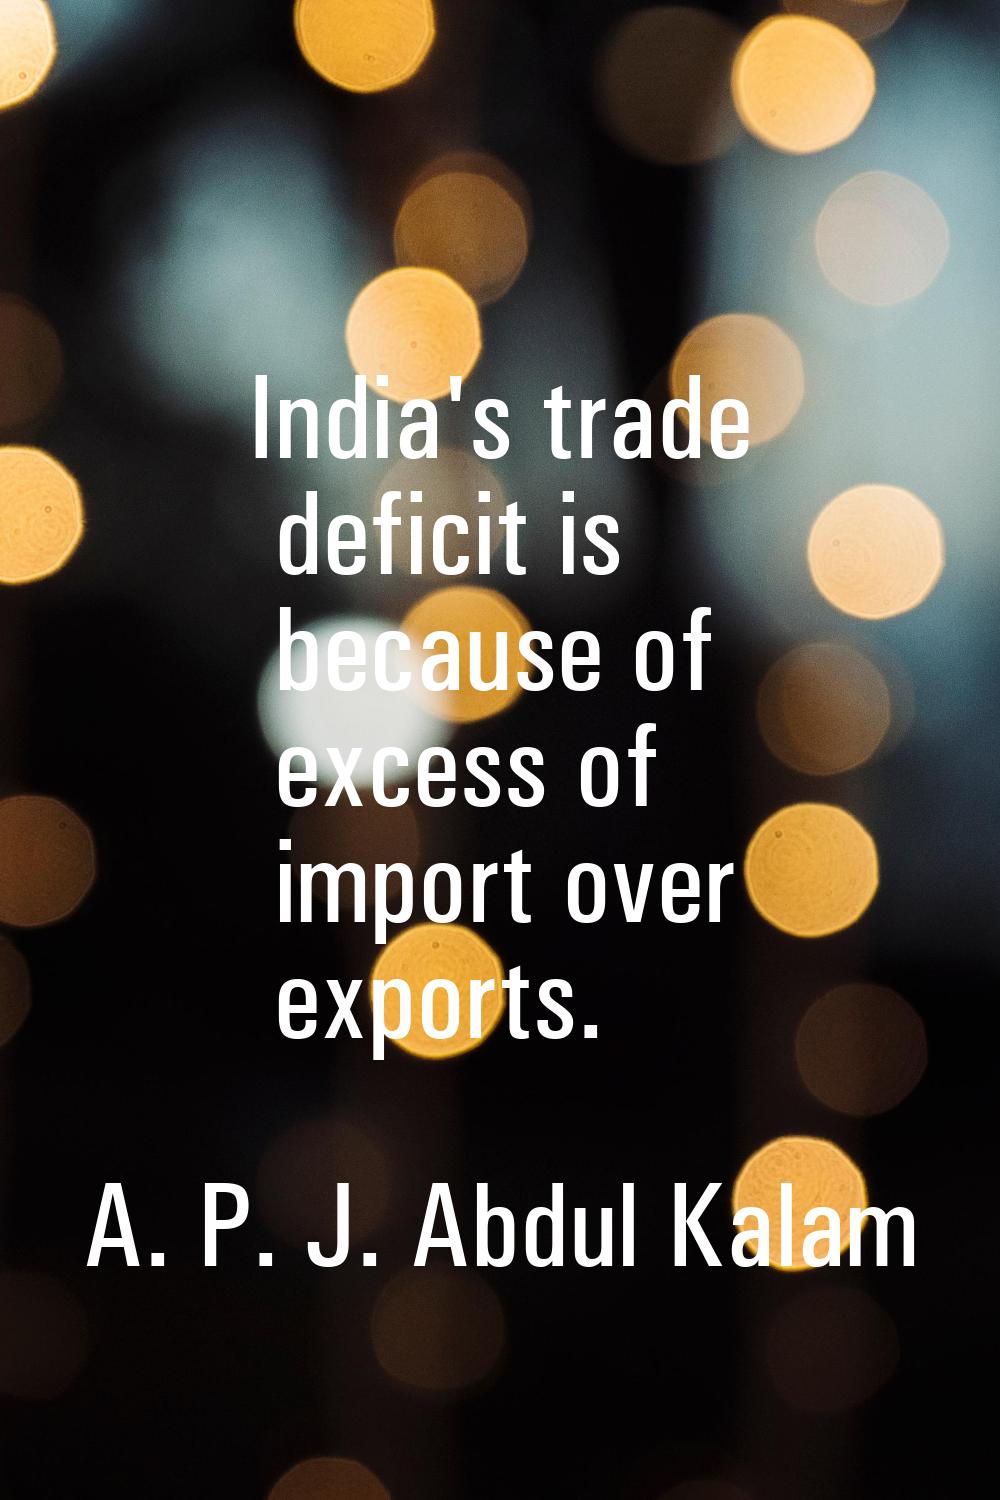 India's trade deficit is because of excess of import over exports.